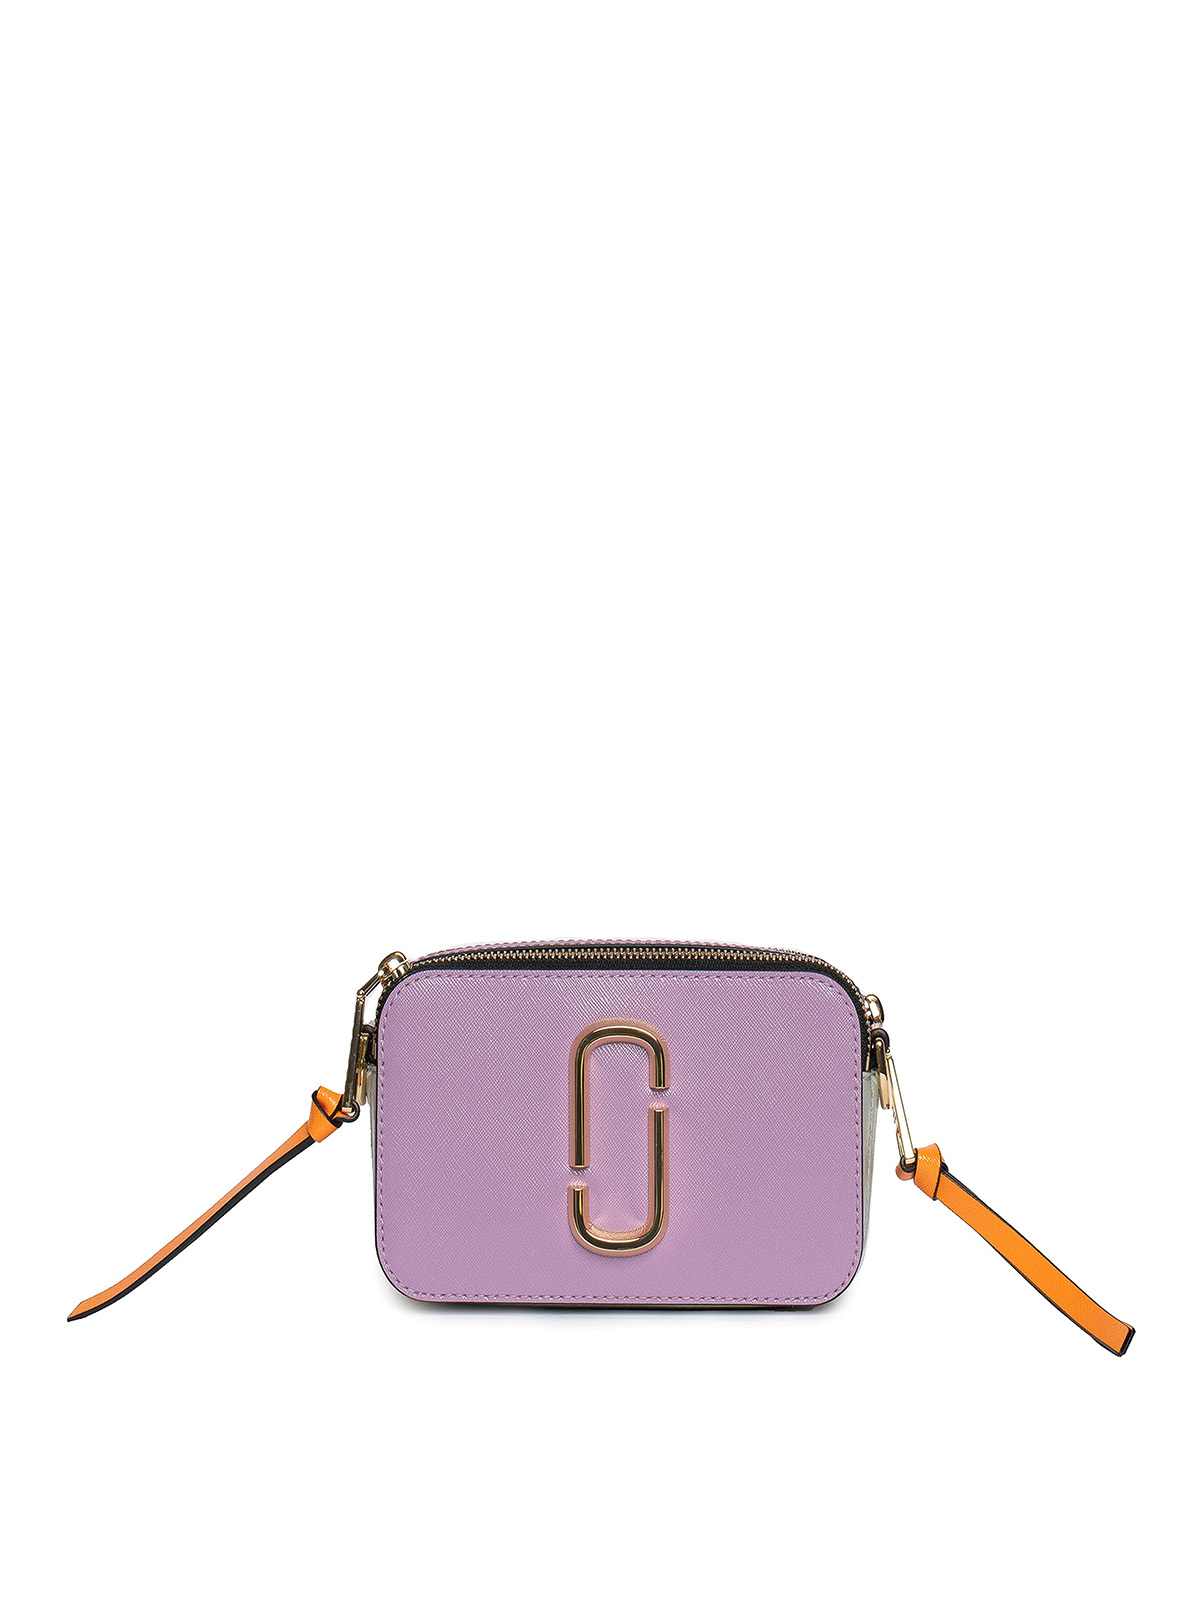 Marc Jacobs The Colorblock Snapshot Bag in Purple